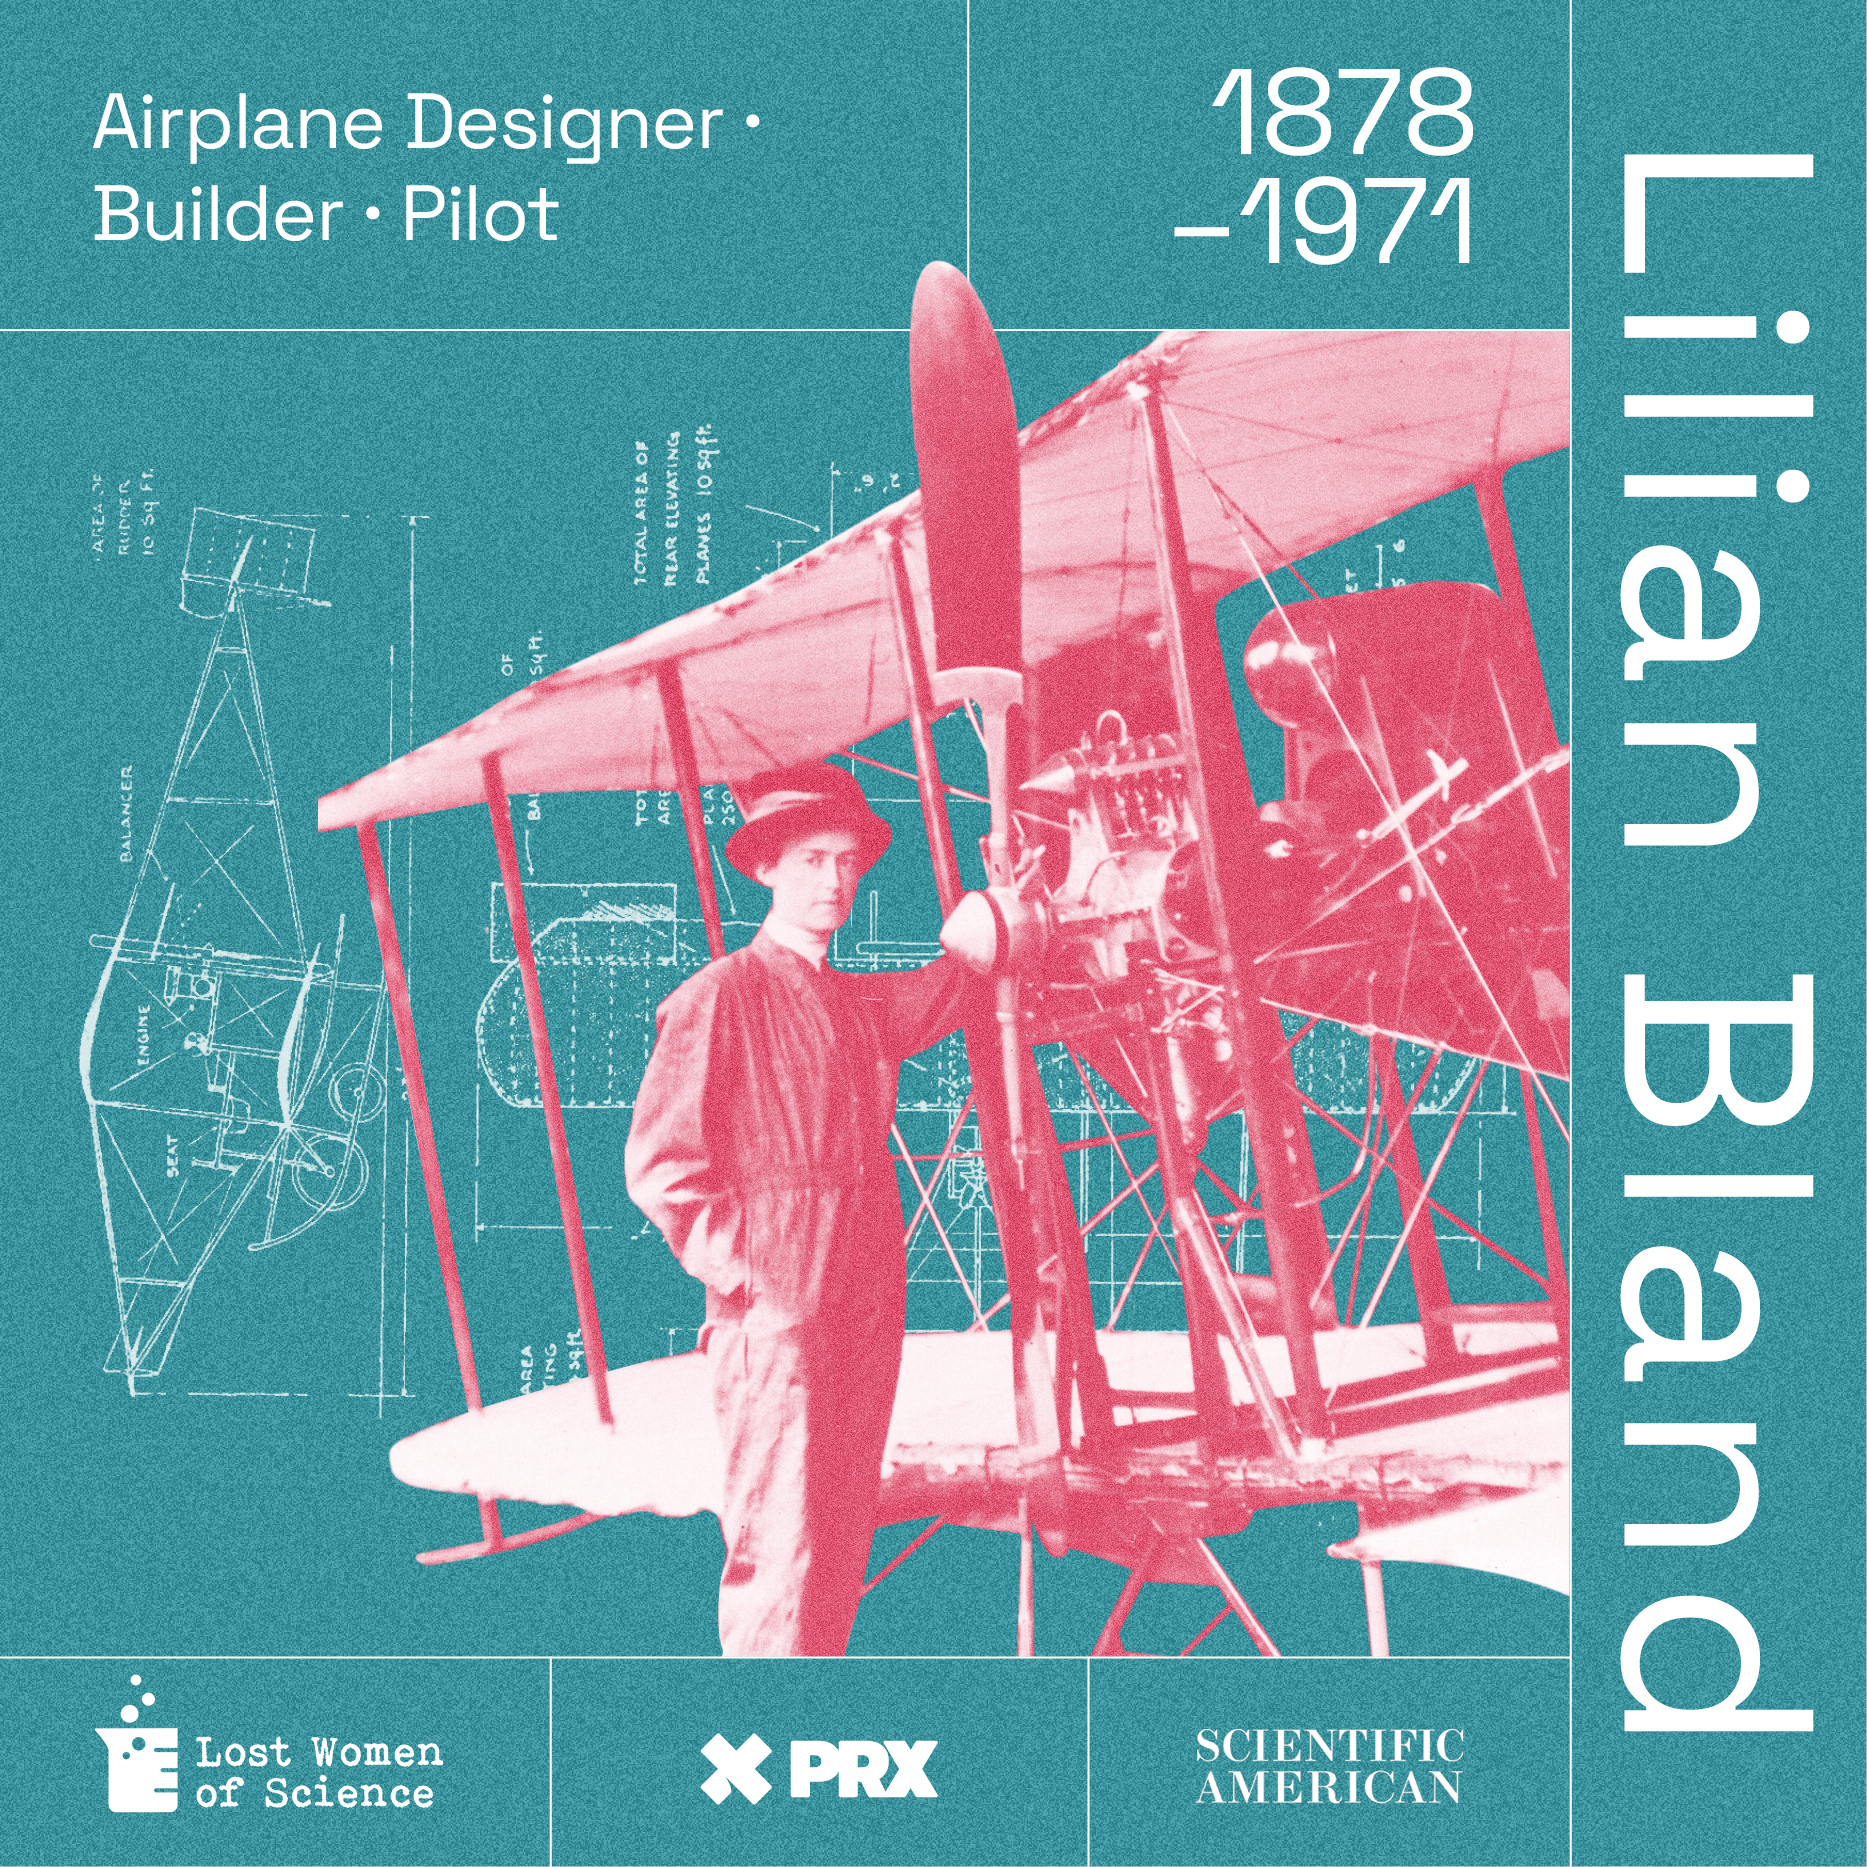 Thumbnail for "How Lilian Bland Built Herself A Plane".